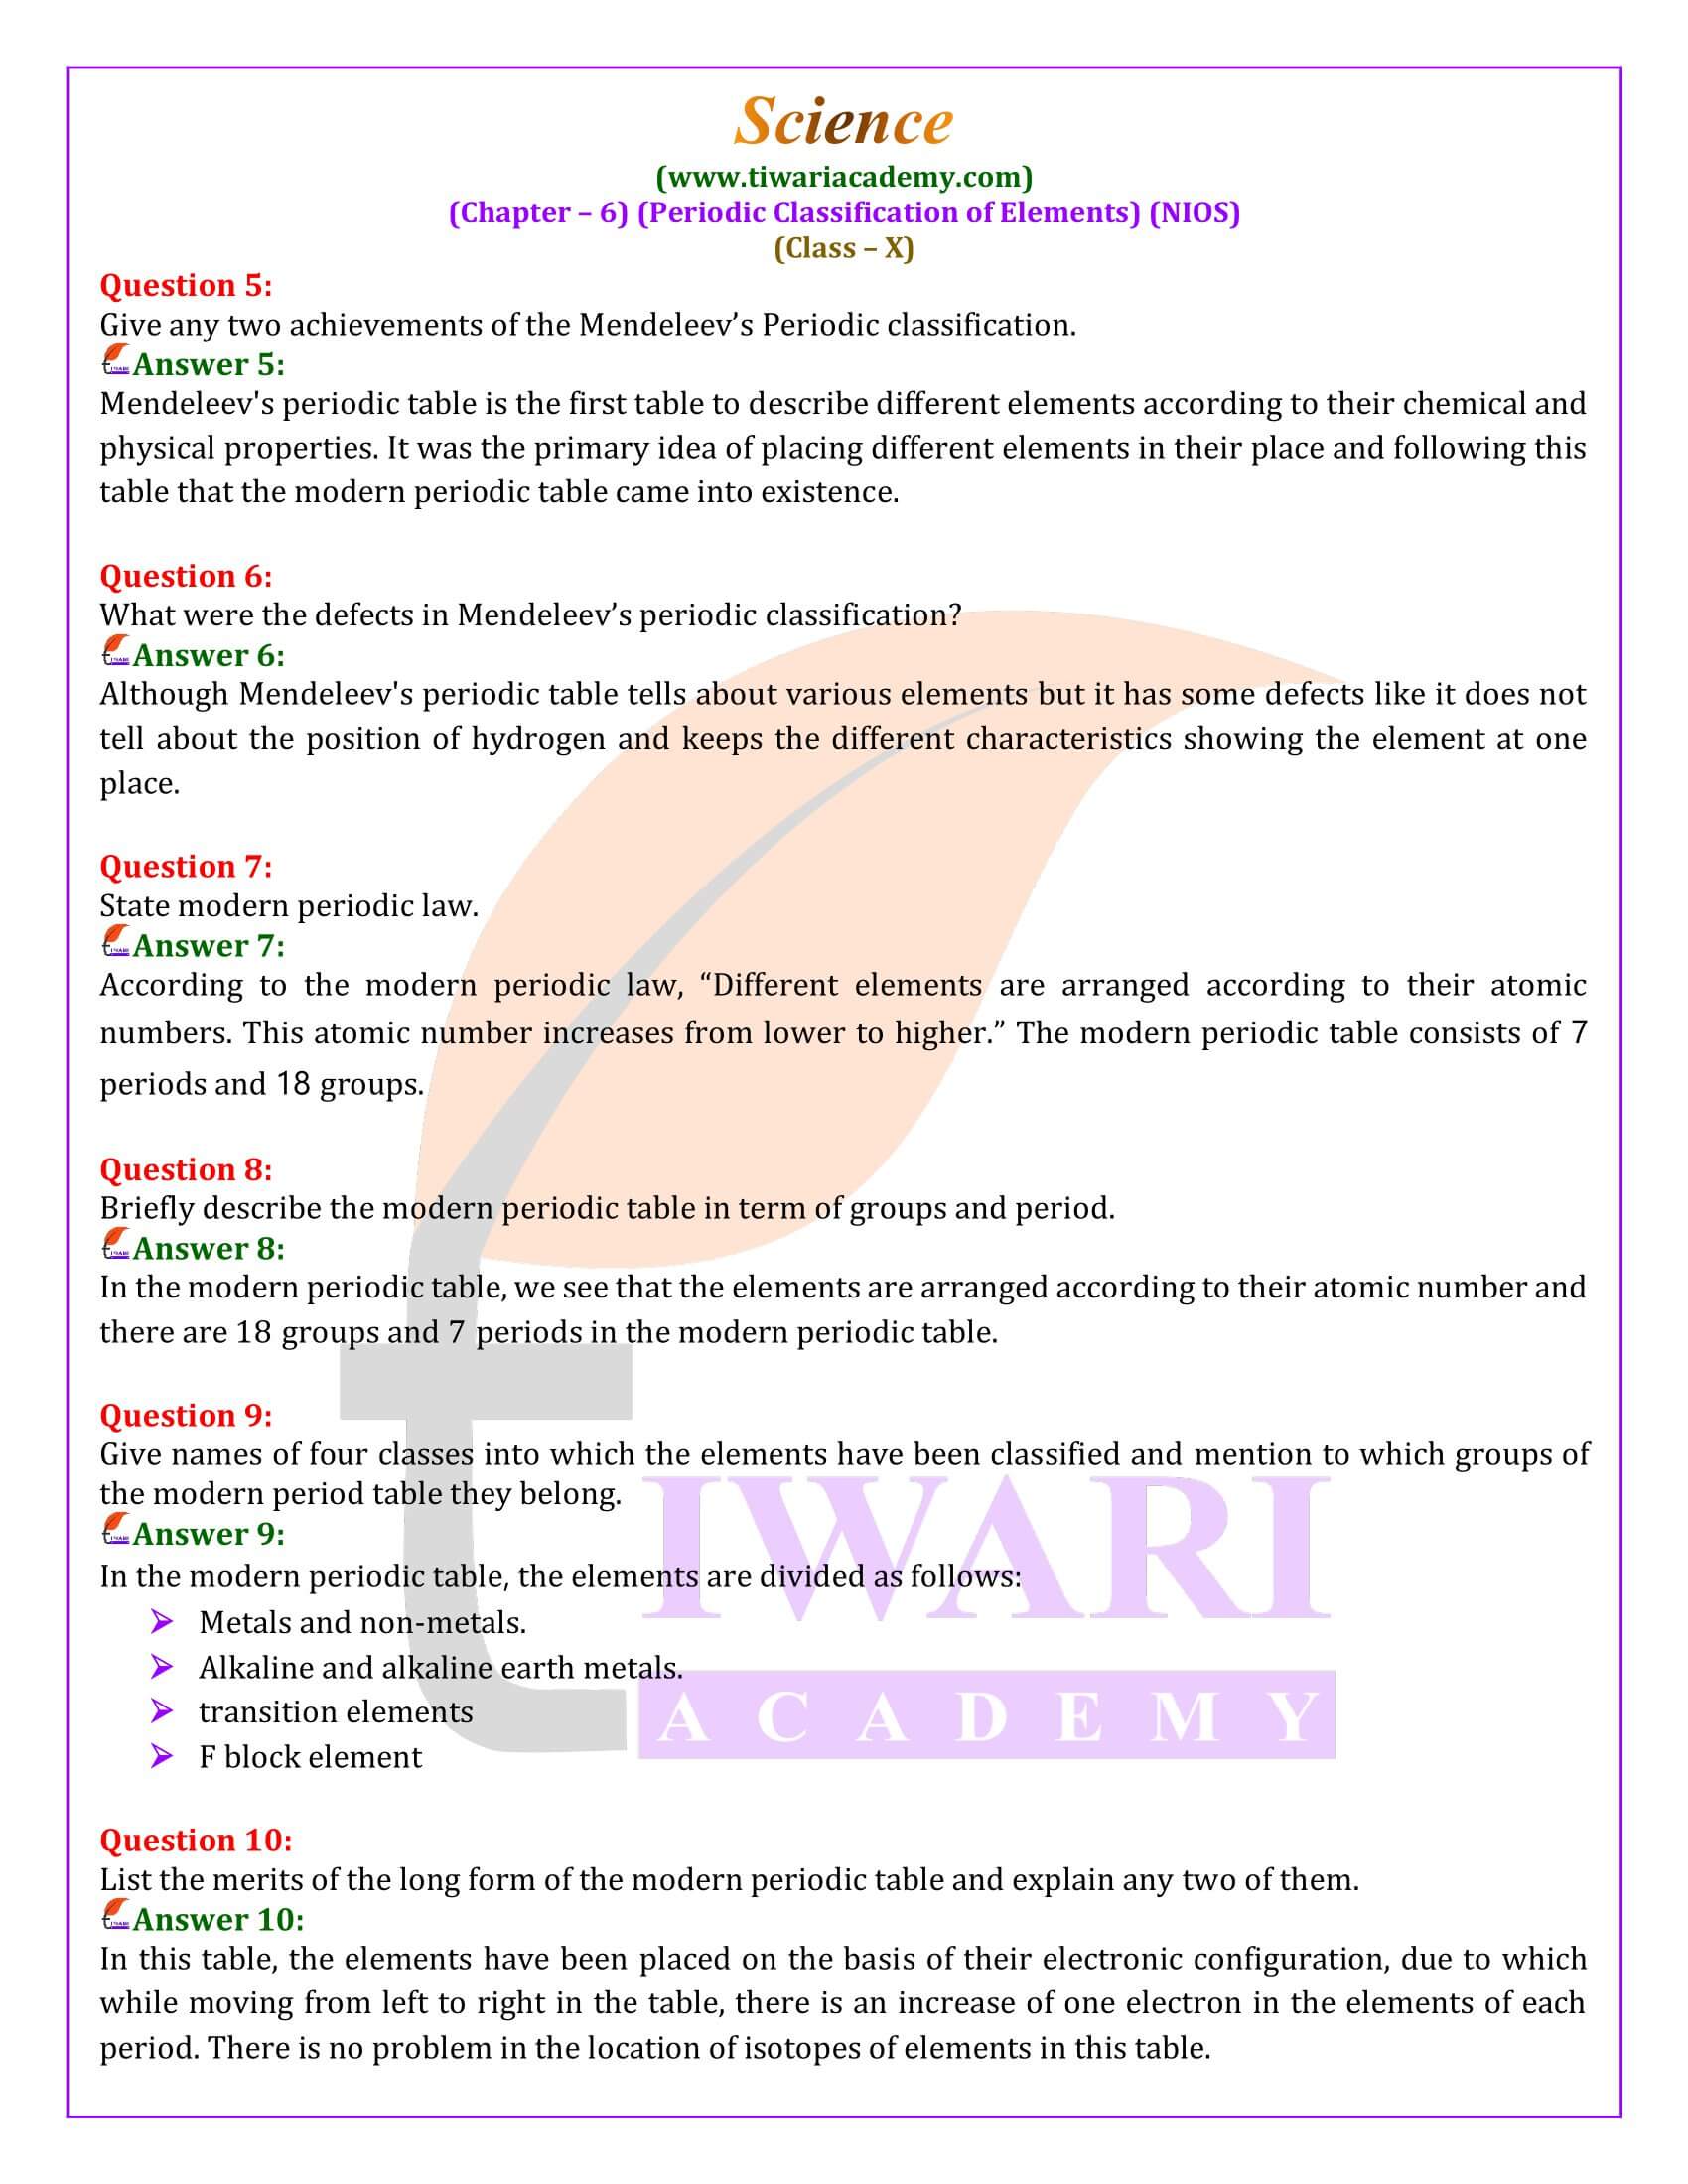 NIOS Class 10 Science Chapter 6 Periodic Classification of Elements in English Medium